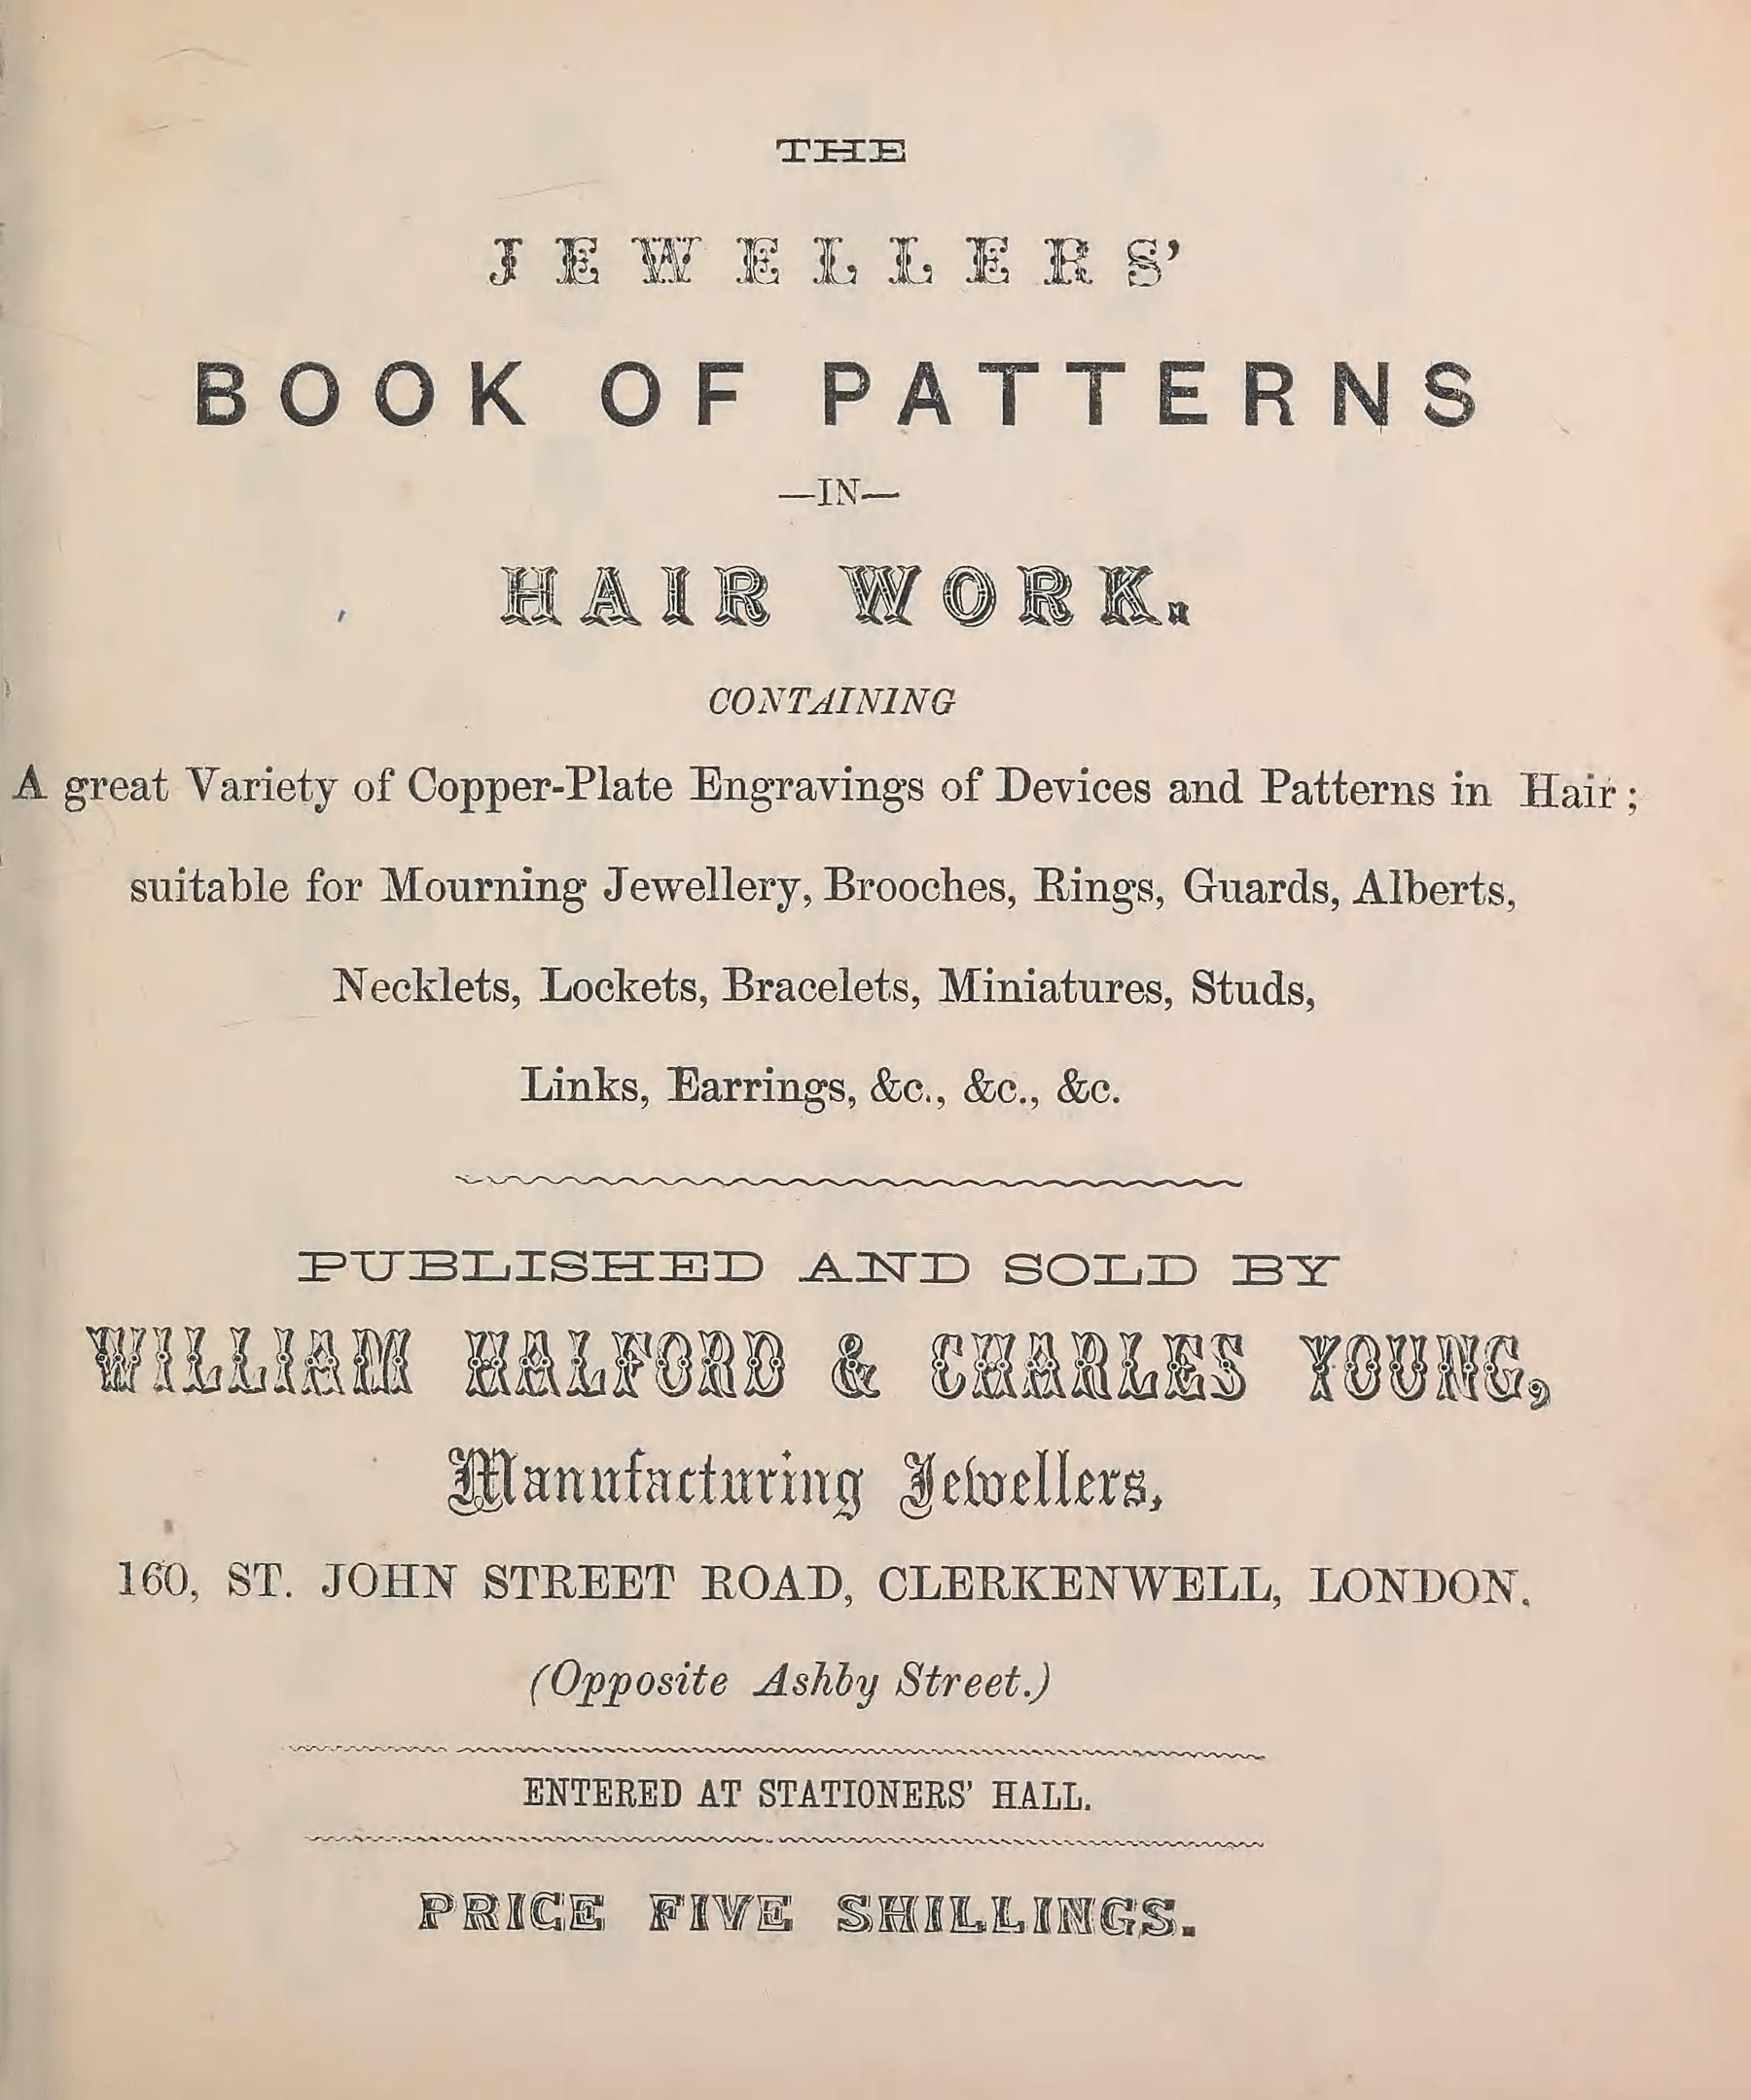 <a href="https://library.si.edu/digital-library/book/jewellersquotbo00will" target="_blank" rel="noopener">The Jewellers’ Book of Patterns in Hair Work</a>. Published and sold by William Halford & Charles Young, manufacturing jewellers, 1864. 